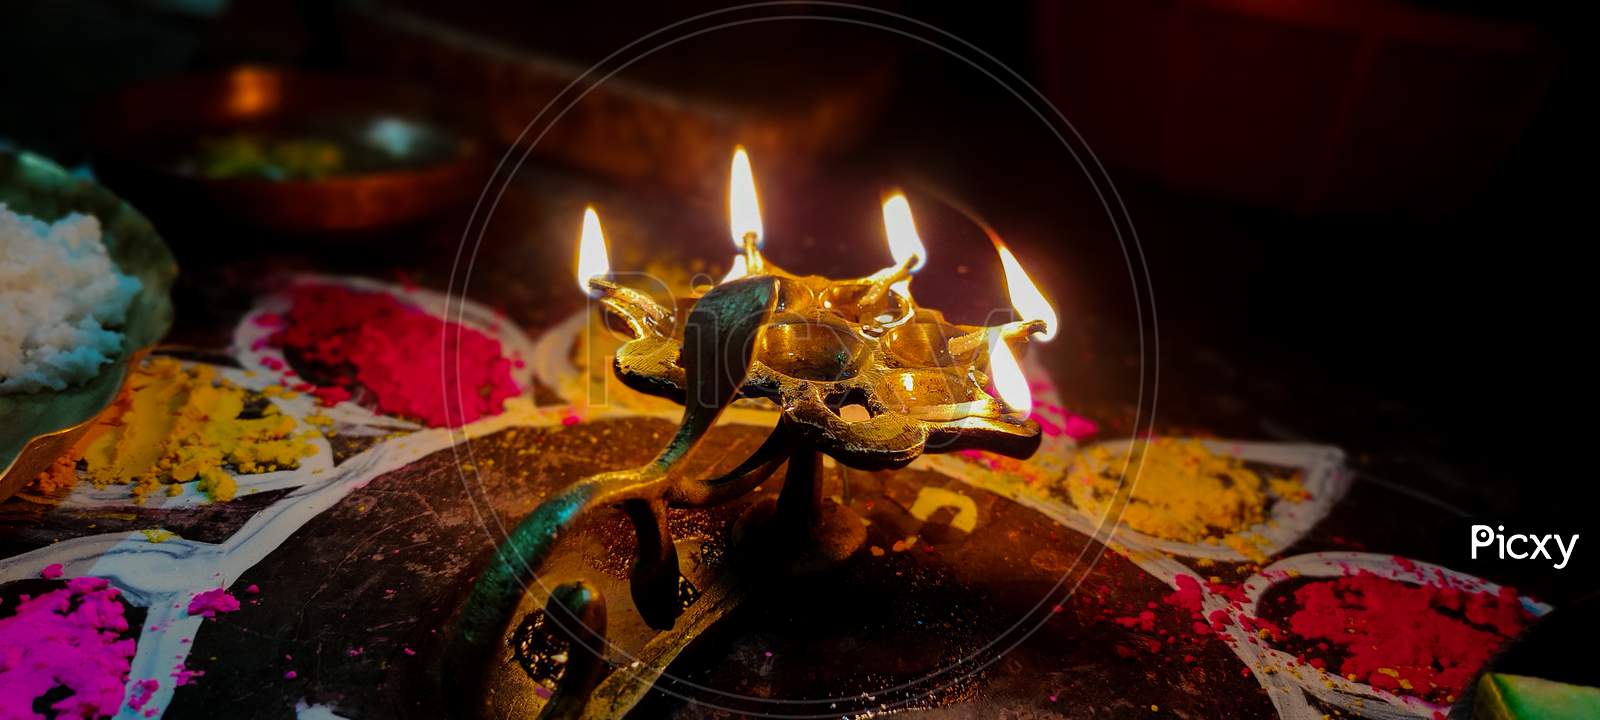 A Glowing Multi Flame Lamp Commonly Known As Panchapradip. A Holy Thing Used As An Offering To God For Worship. Surrounded By Colourful Rangoli.